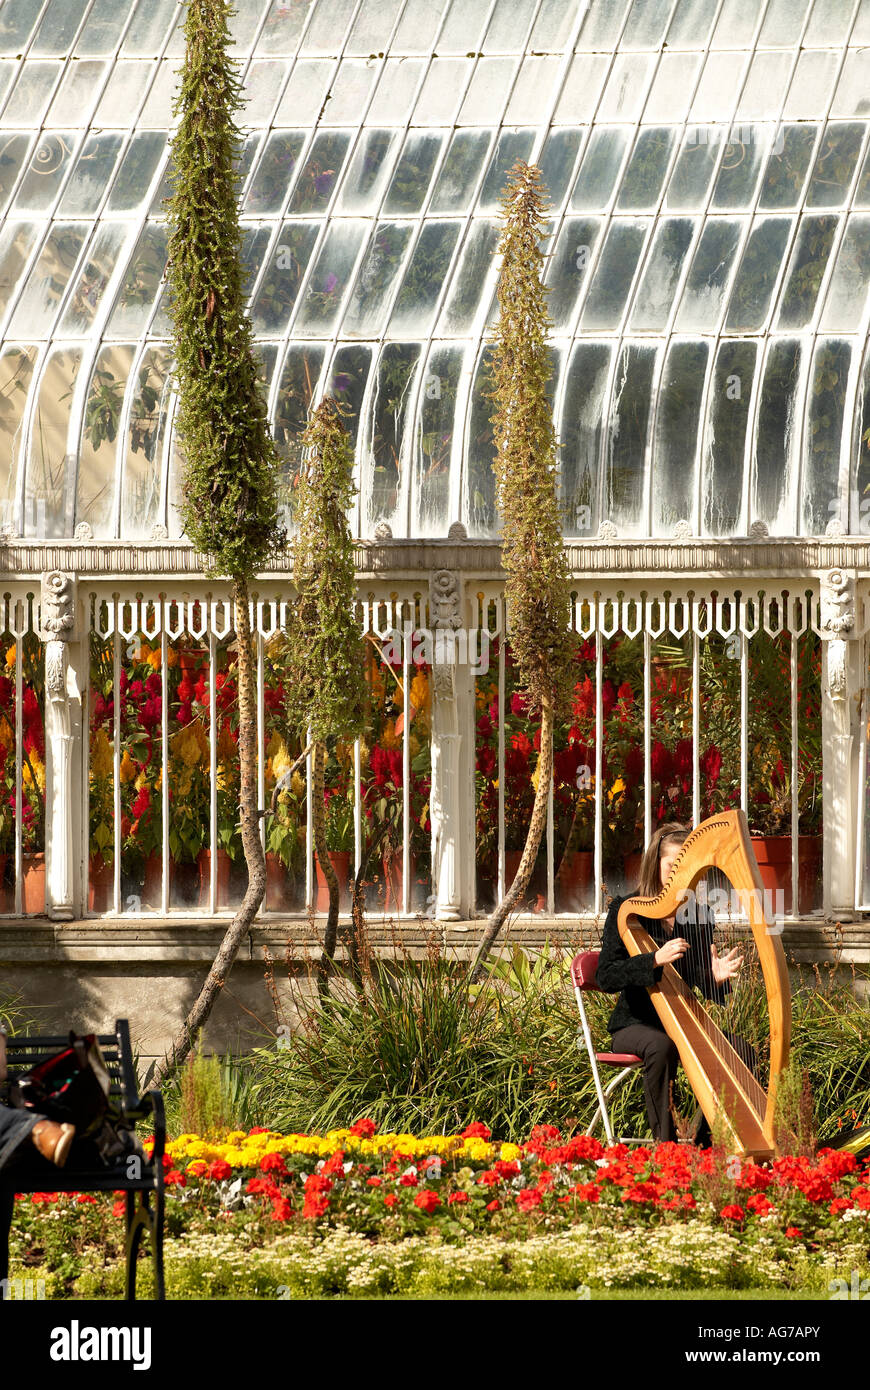 A Young Harpist Playing Outside The Palm House At The Garden